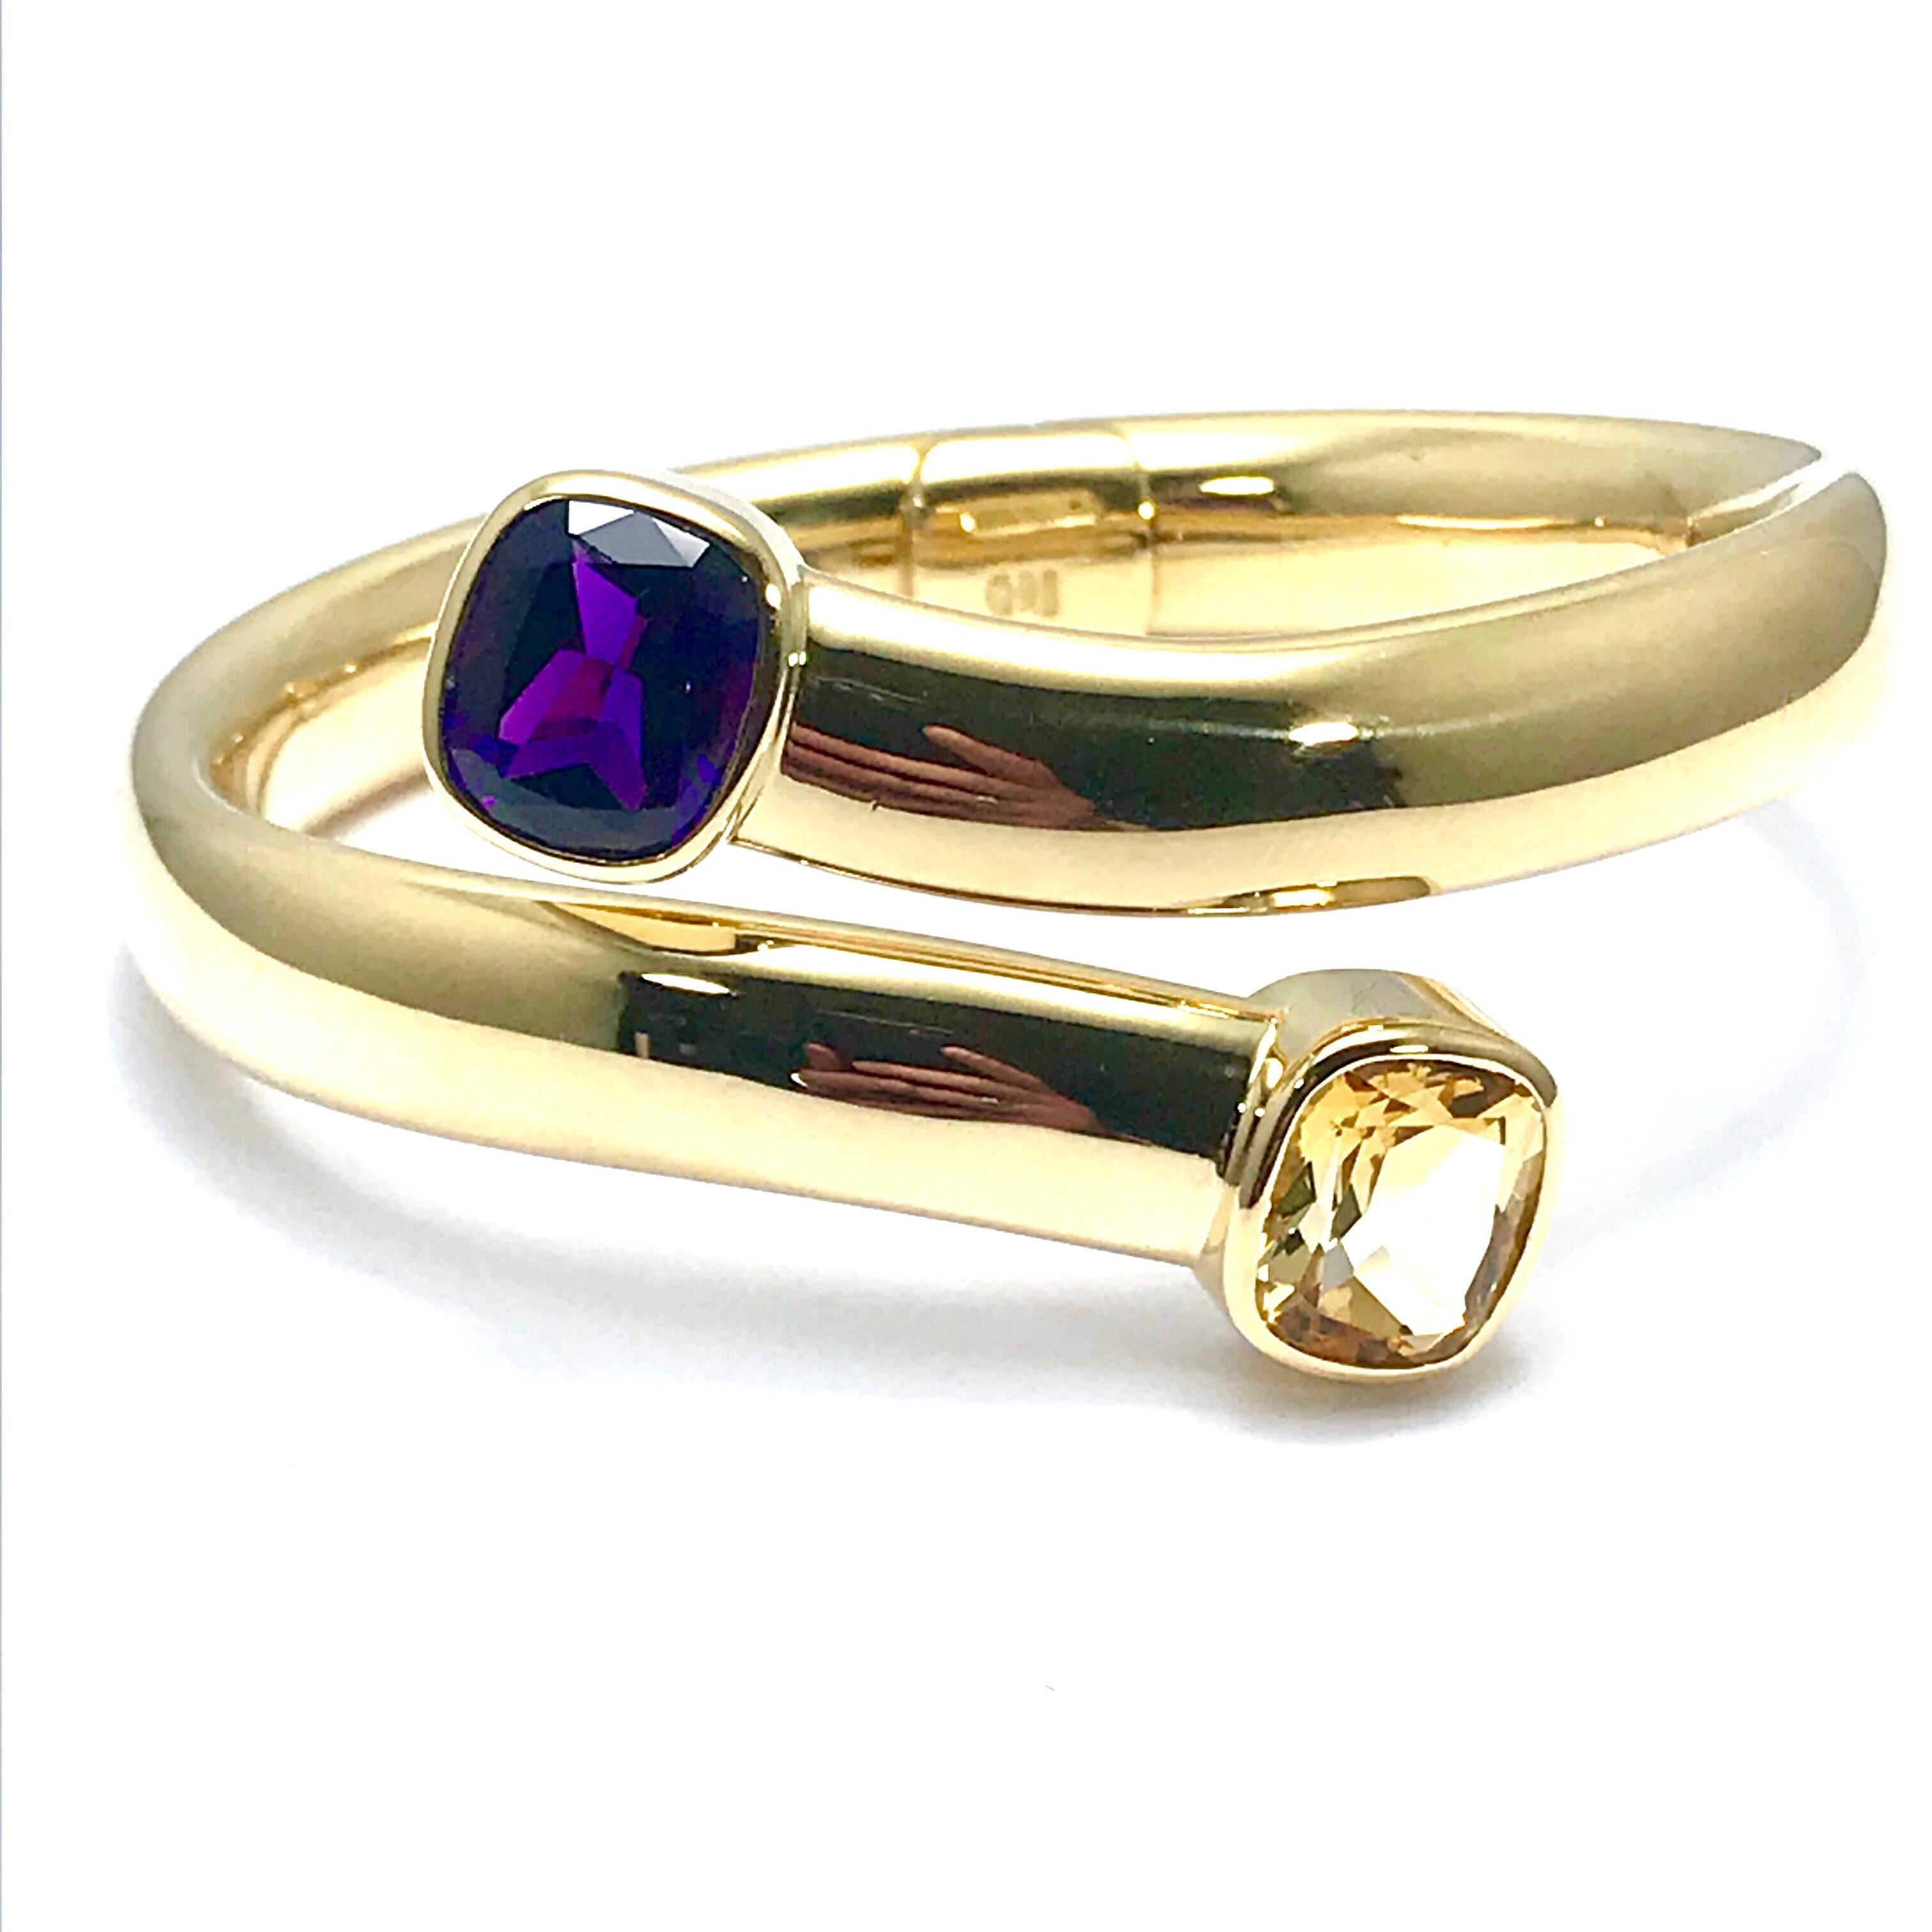 This is a great, easy to wear bracelet!  There is a 5.00 carat cushion shaped Amethyst, and a 5.00 carat cushion shaped Citrine in an 18 karat yellow gold hinged bypass bangle bracelet.  The stones are both bezel set at each end of the bracelet,